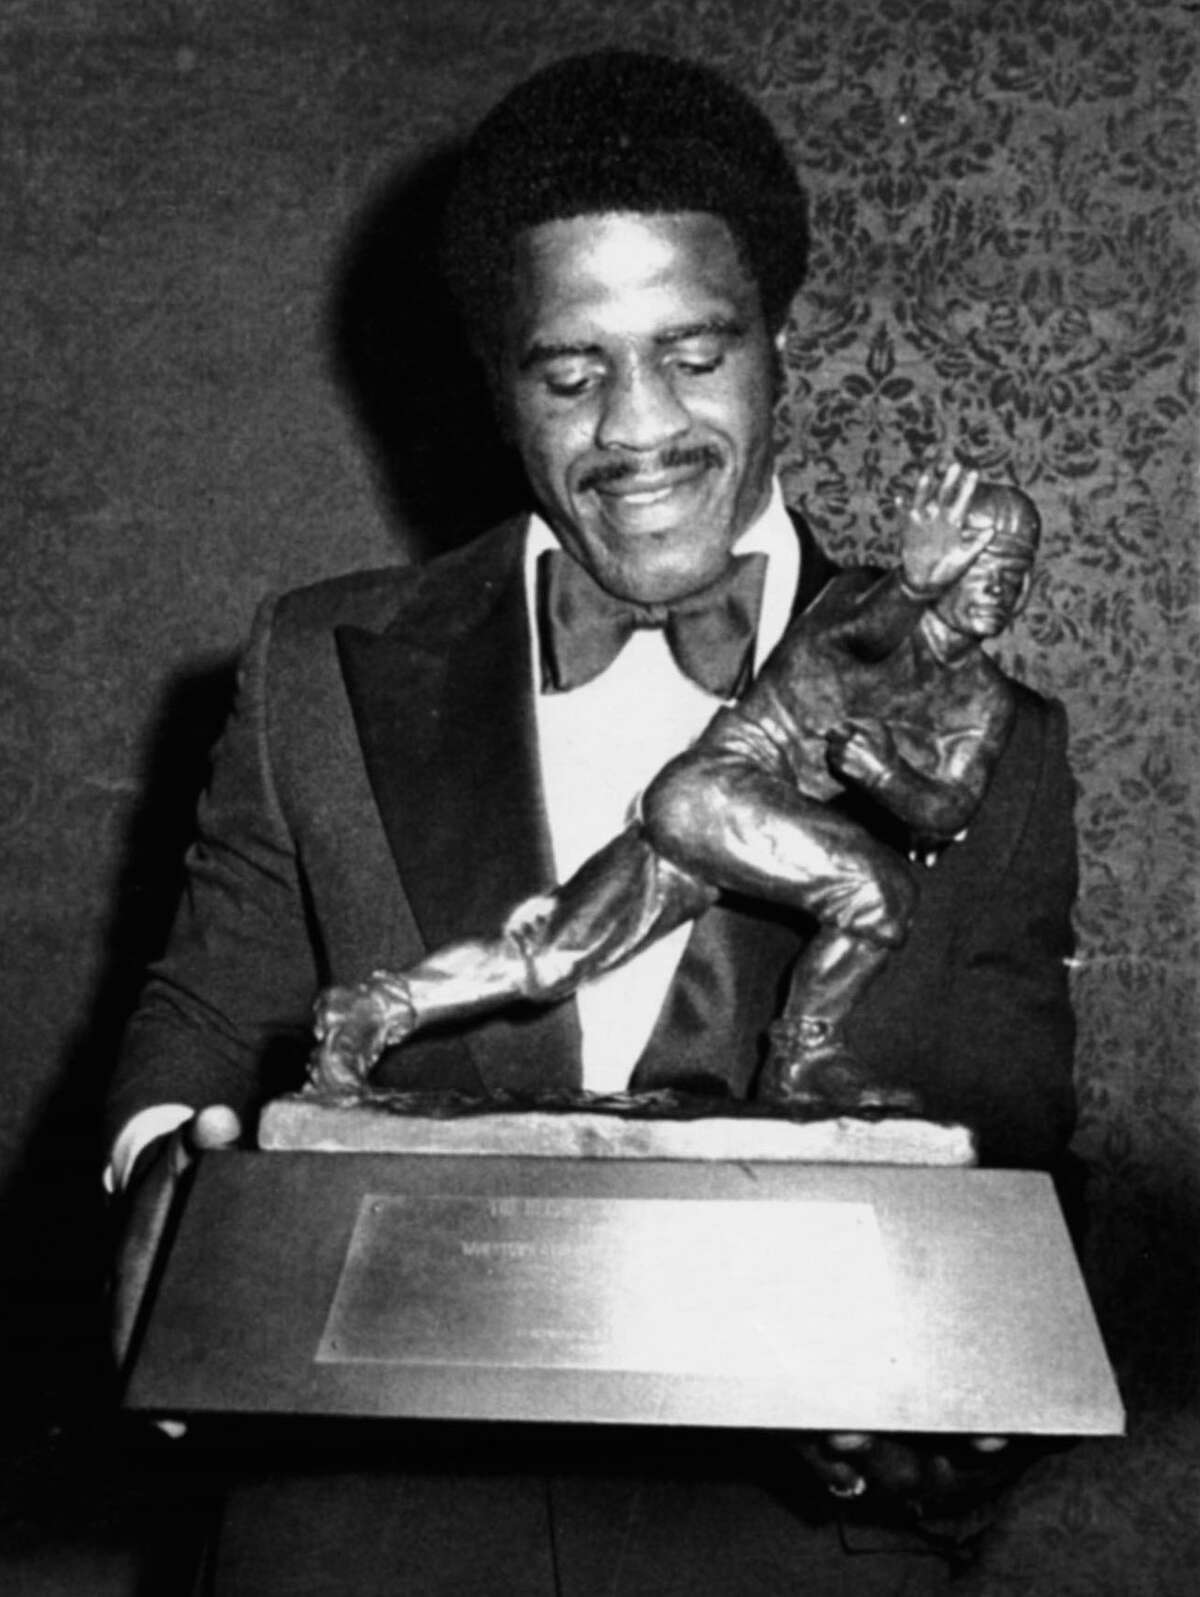 The Tyler Rose, Earl Campbell, claimed the 1977 Heisman.